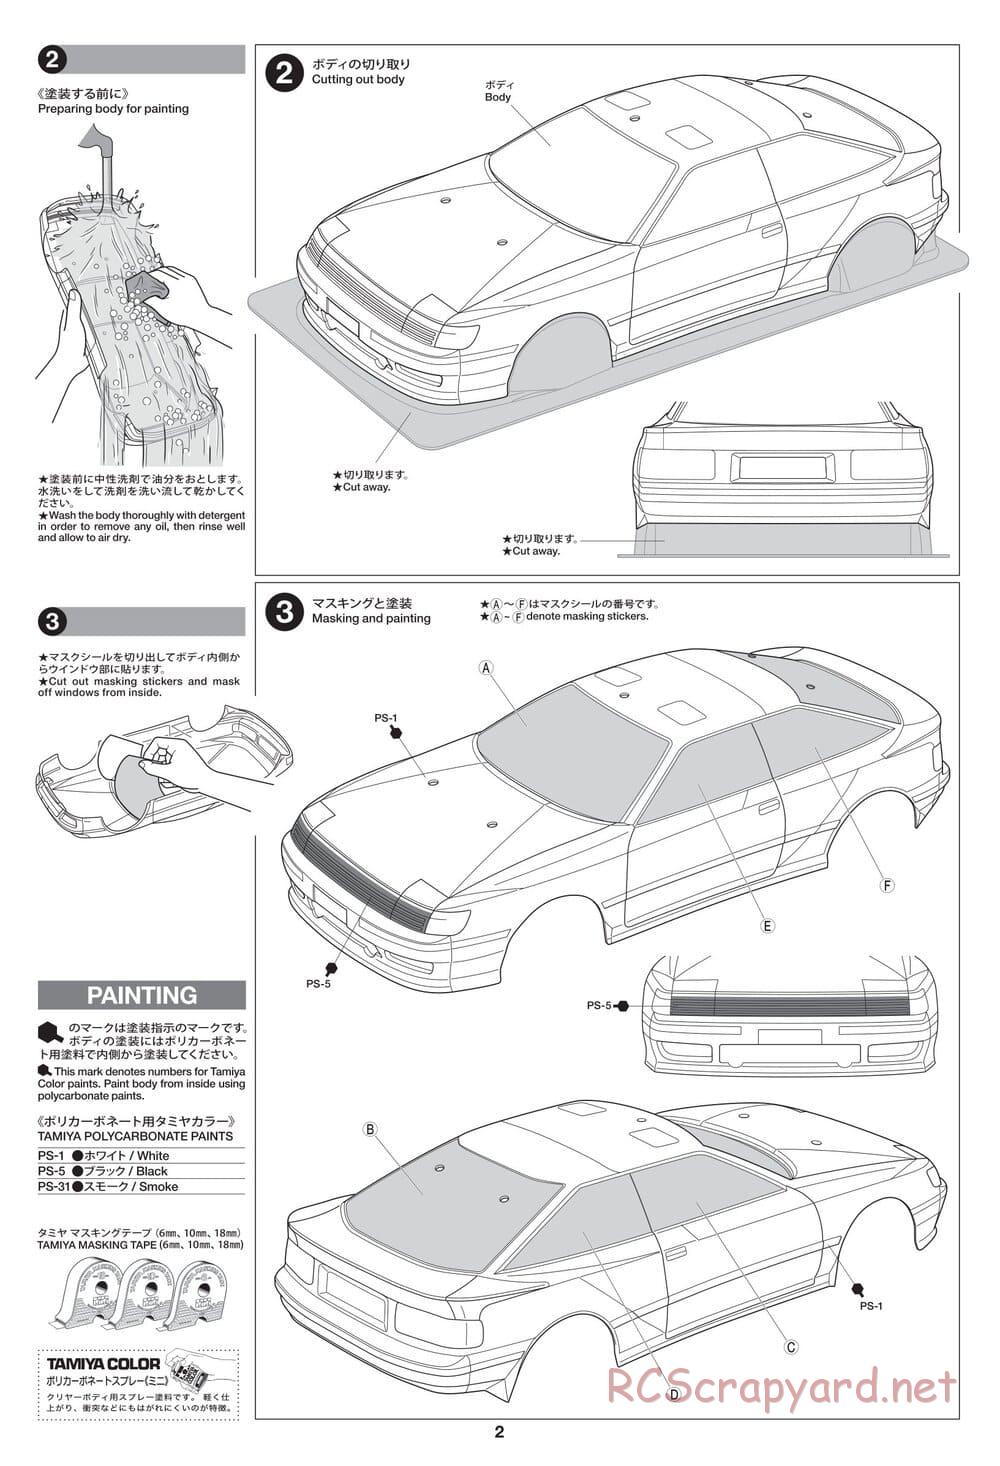 Tamiya - Toyota Celica GT-Four (ST165) - TT-02 Chassis - Body Manual - Page 2